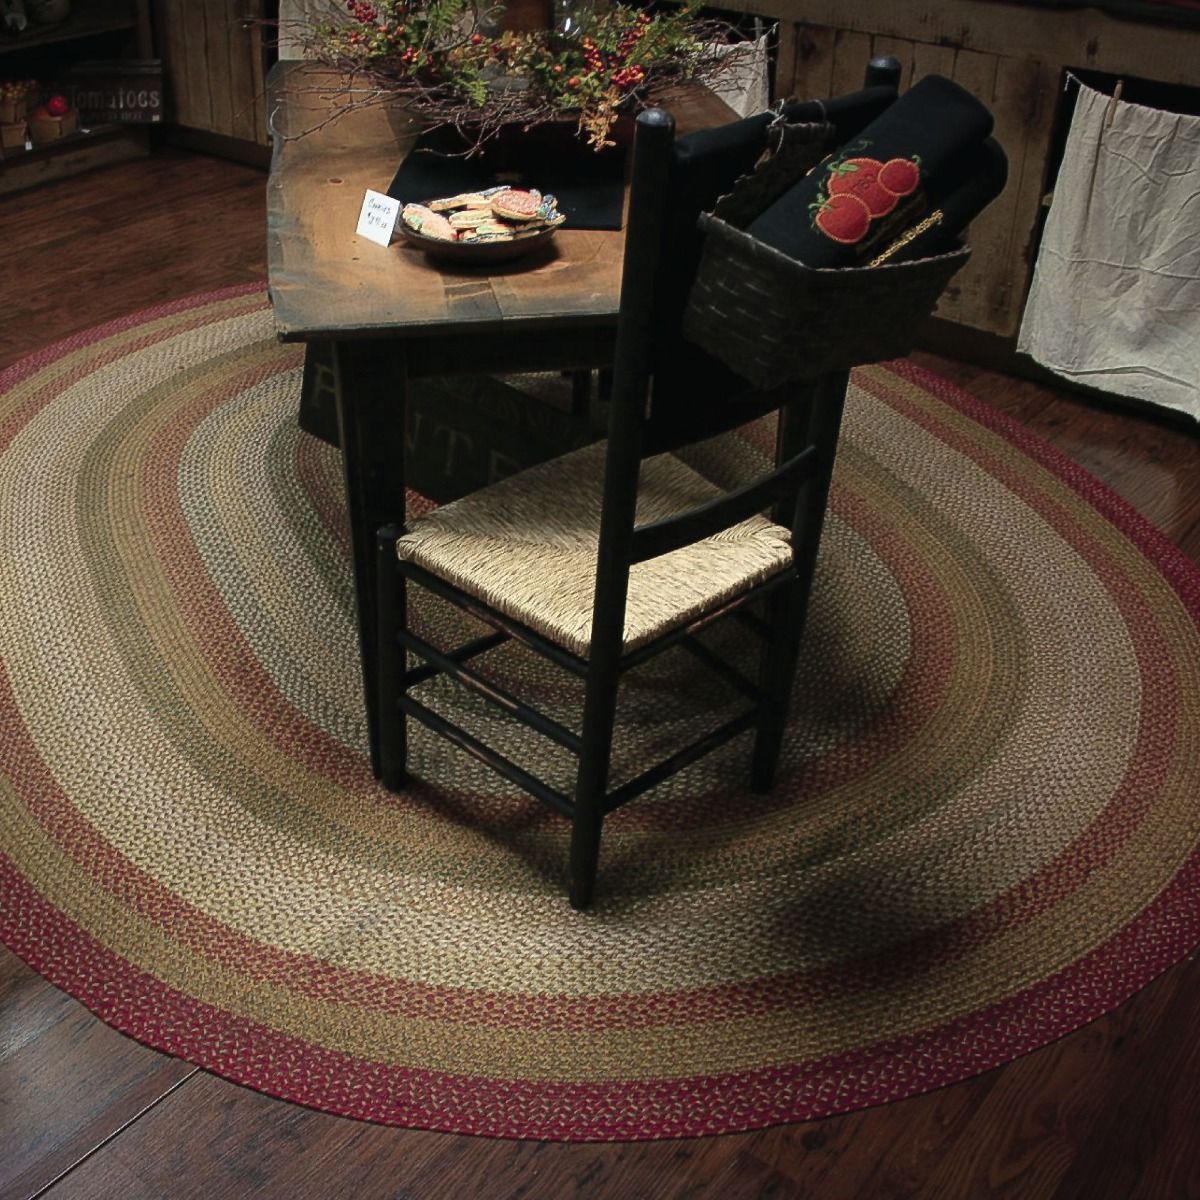 Mustard Seed Red - Green Jute Braided Oval Rugs